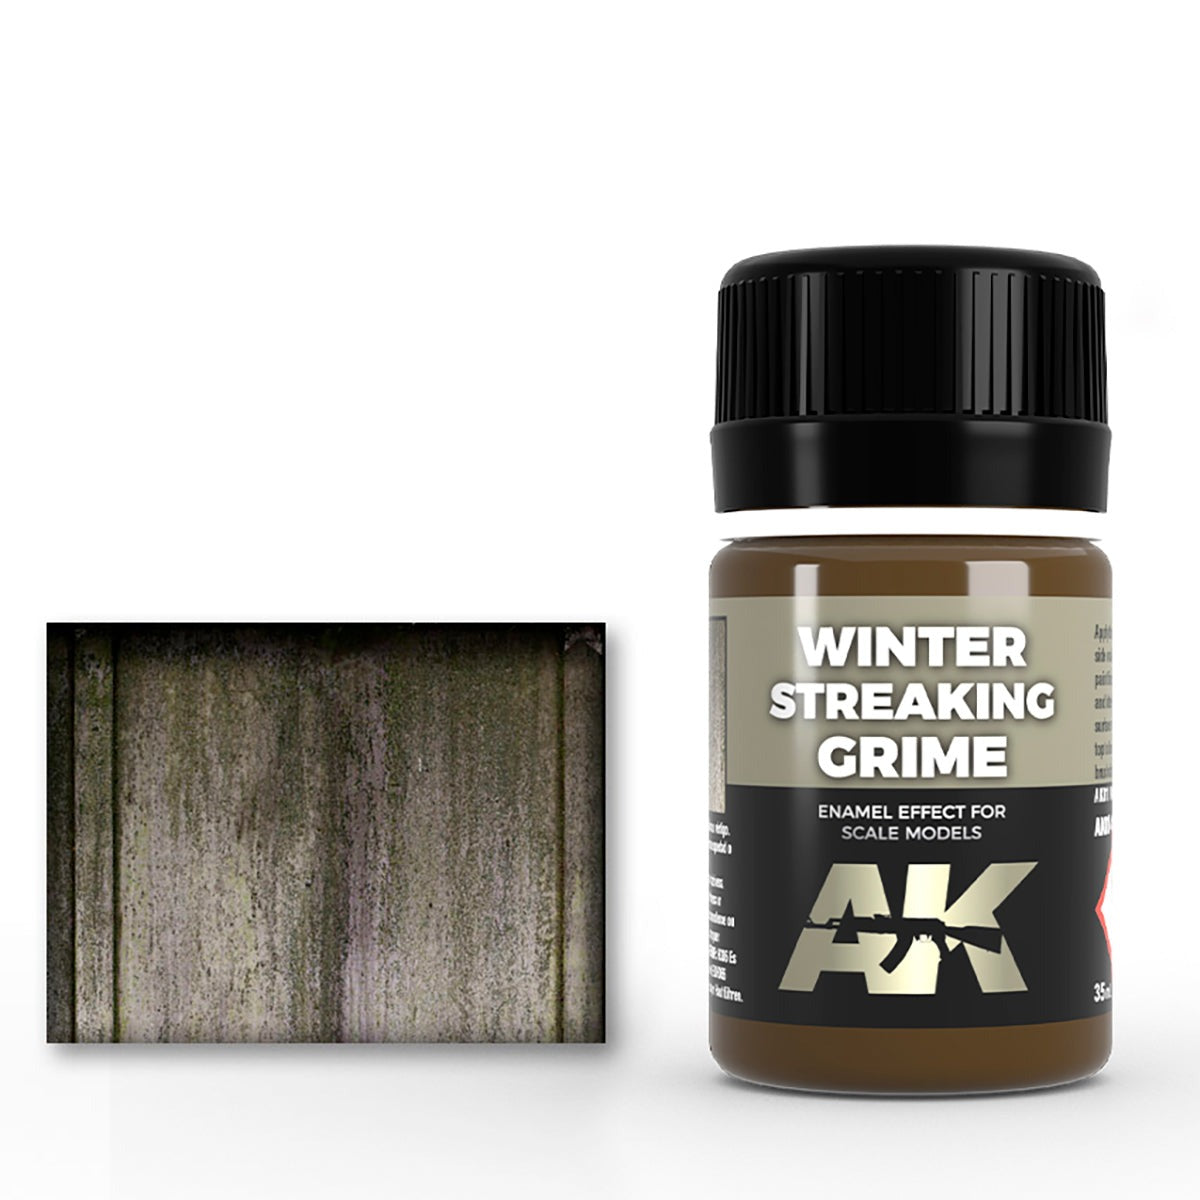 Streaking Grime for Winter Vehicles - Loaded Dice